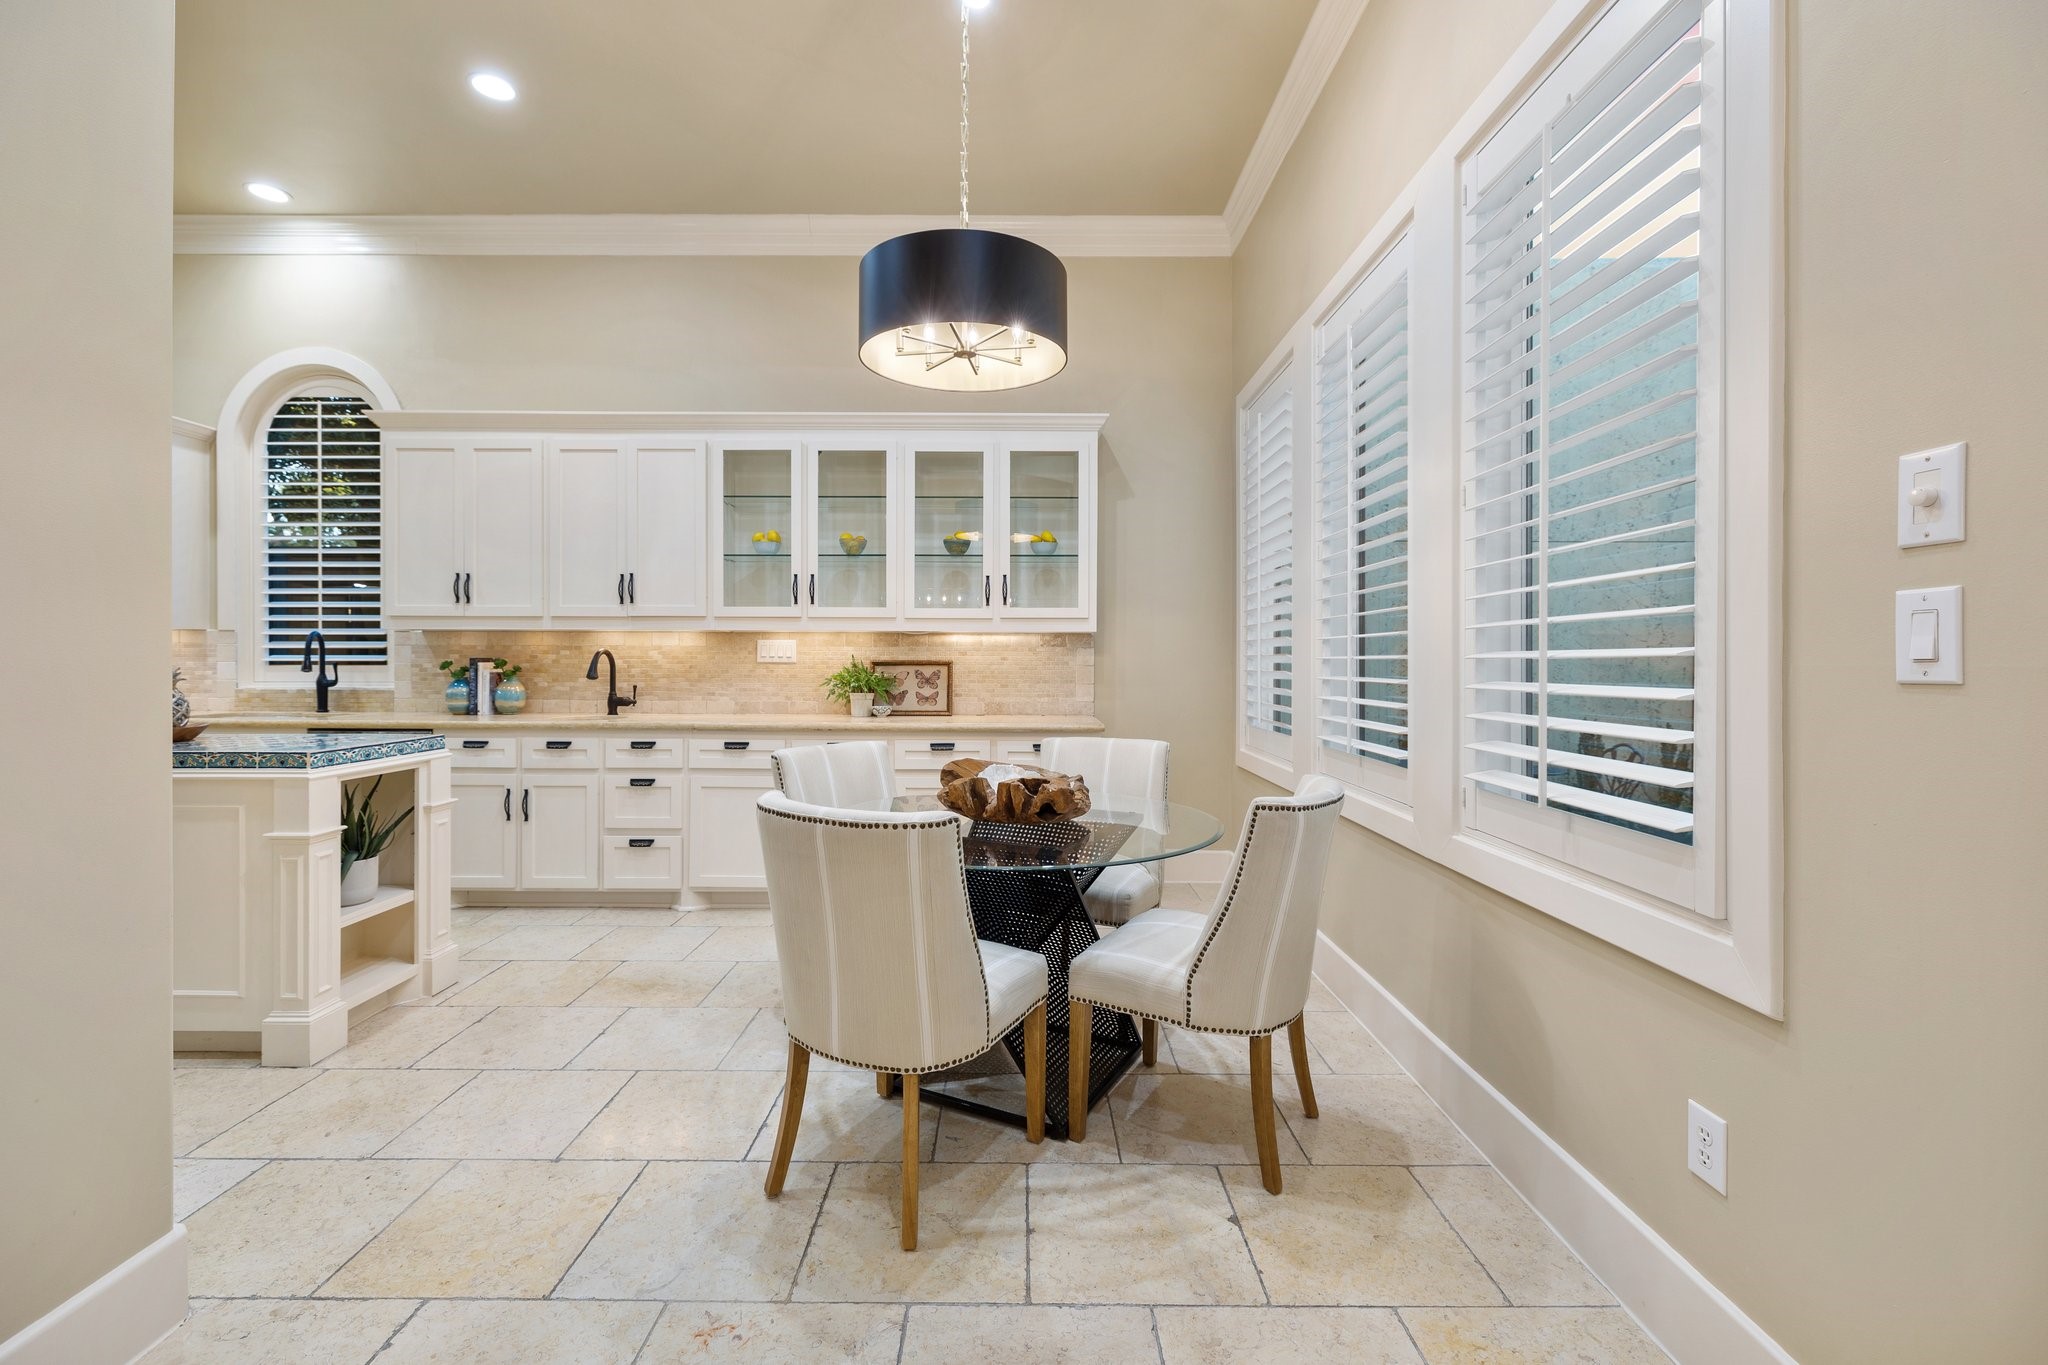 BREAKFAST - Breakfast area with custom light fixture and wall of windows with plantation shutters.